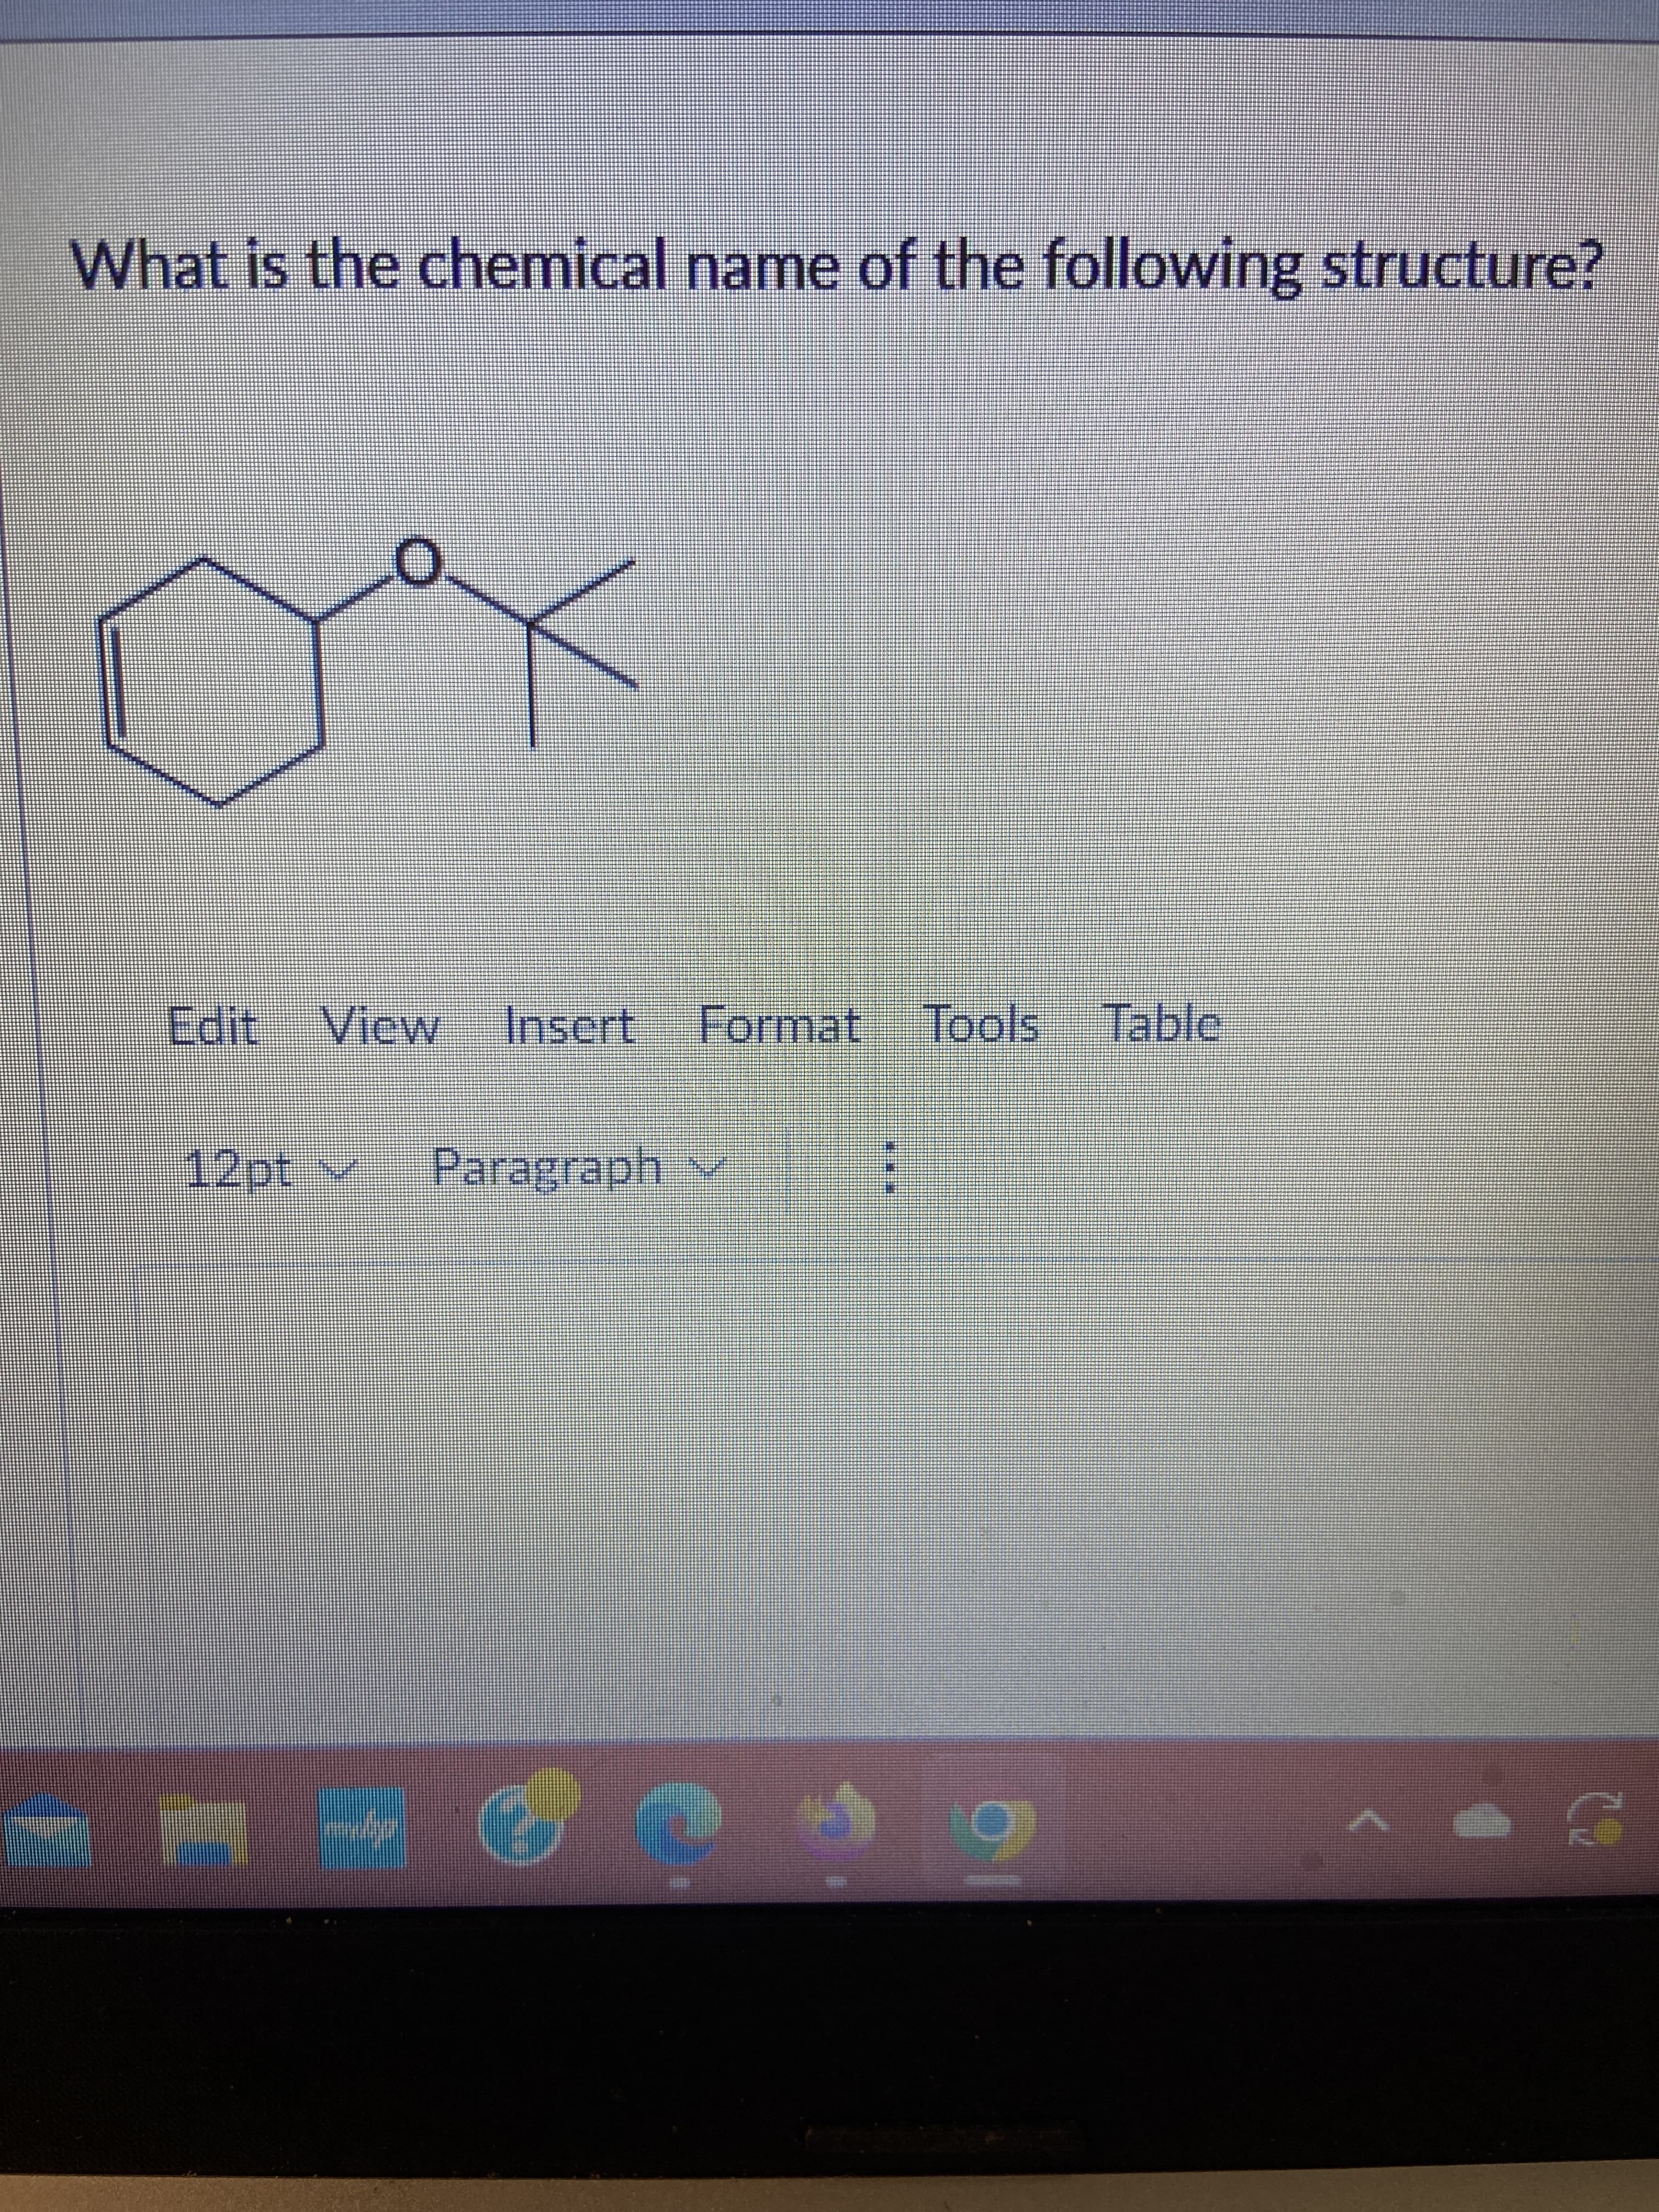 What is the chemical name of the following structure?
Edit View Insert Format Tools Table
12pt
LO
A
Paragraph
?.
ARIADEN
O